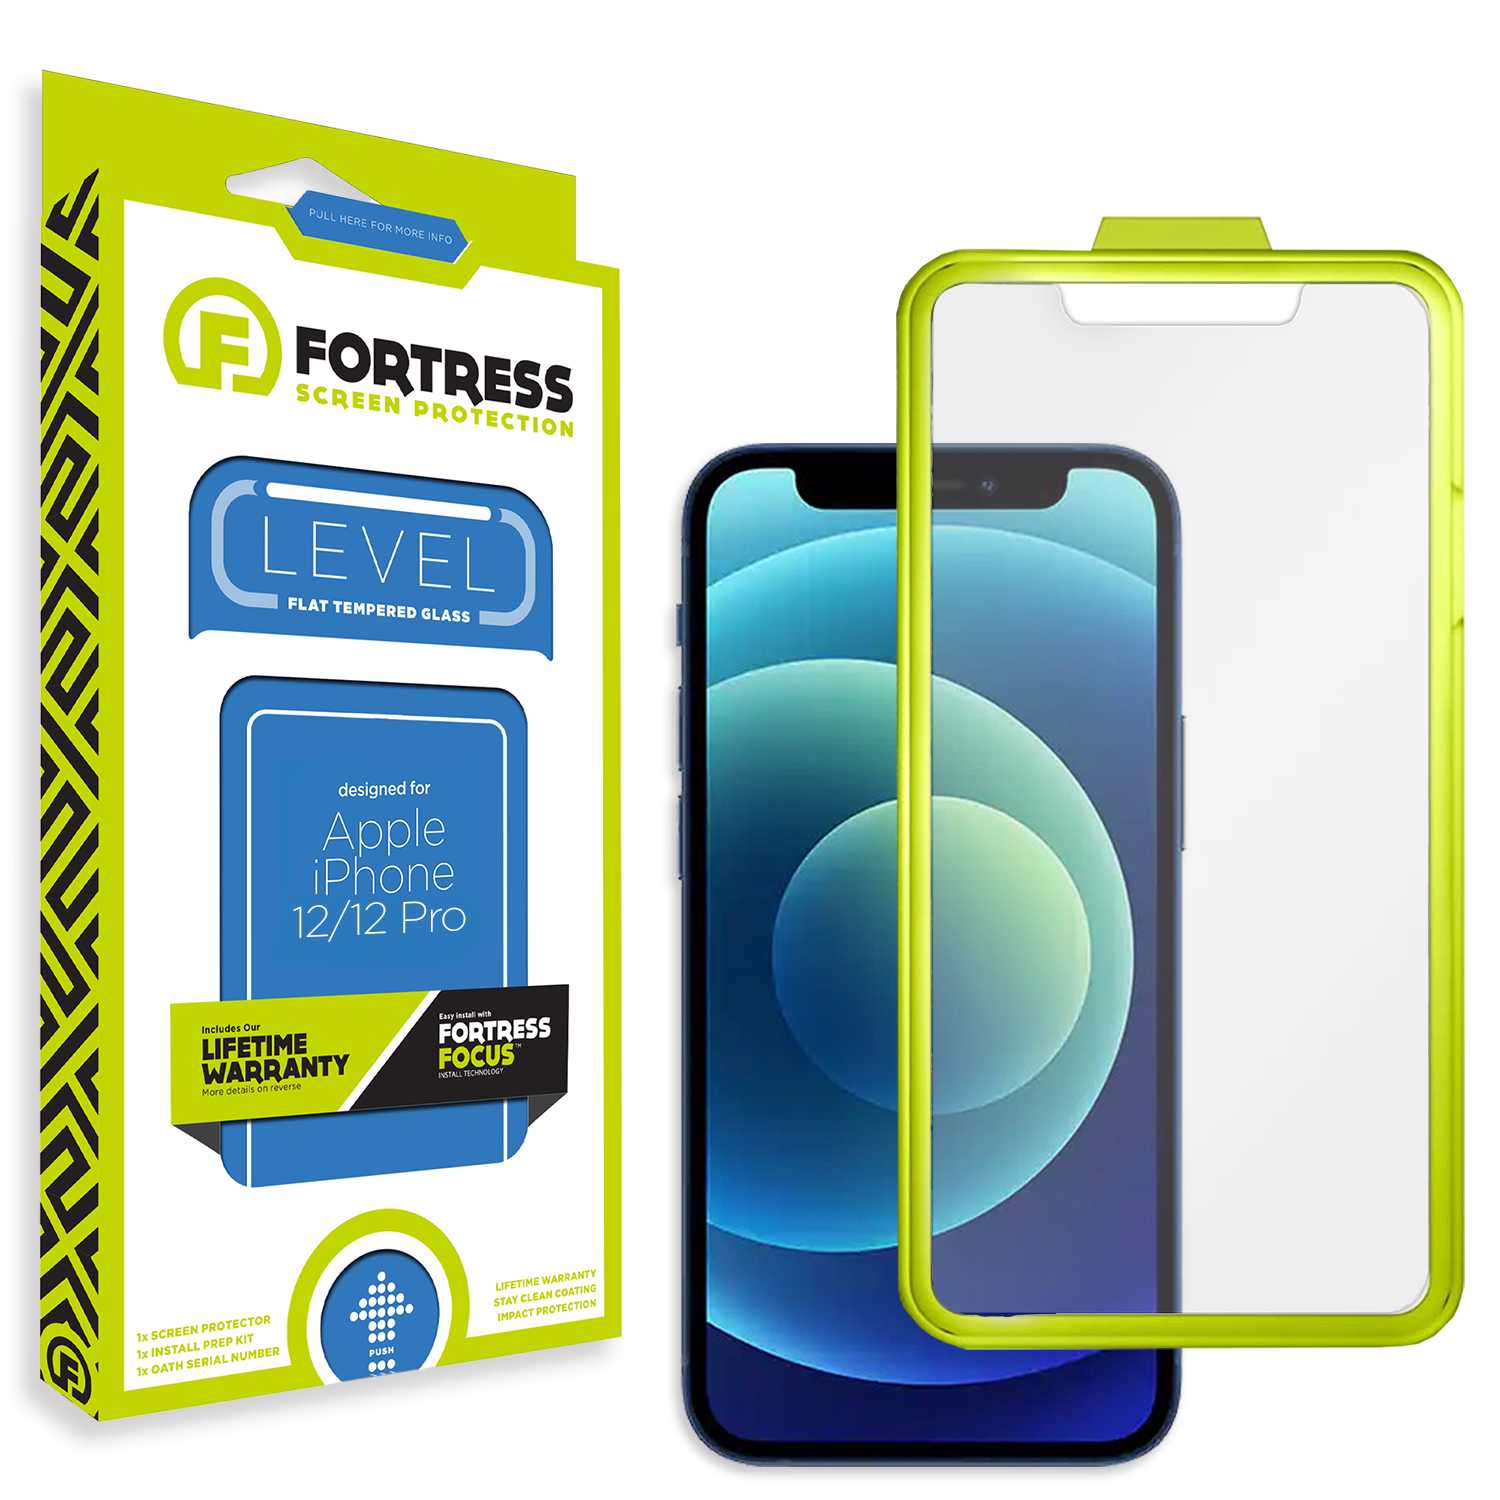 Fortress iPhone 12 Screen Protector $0CoverageInstallTool Scooch Screen Protector